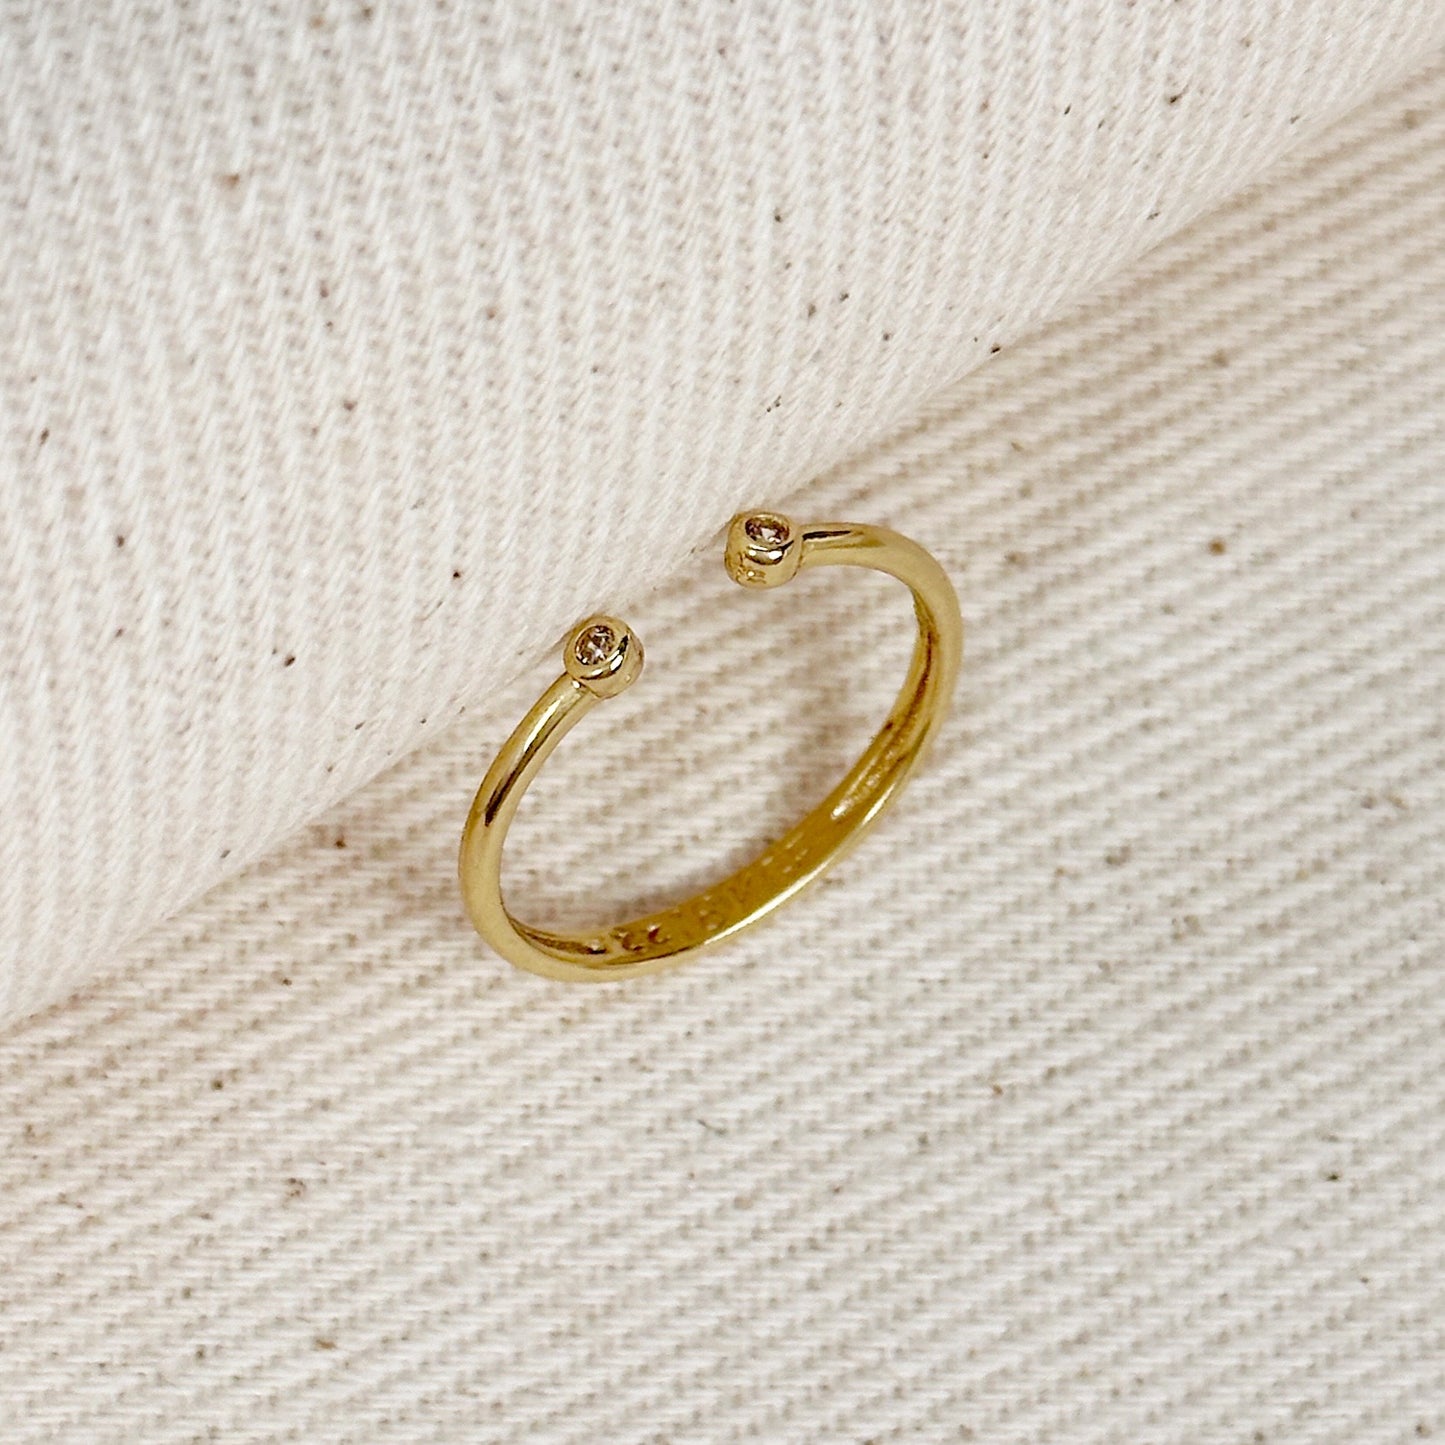 18k Gold Filled Dainty Open Ring with Micro Bezel Zirconia